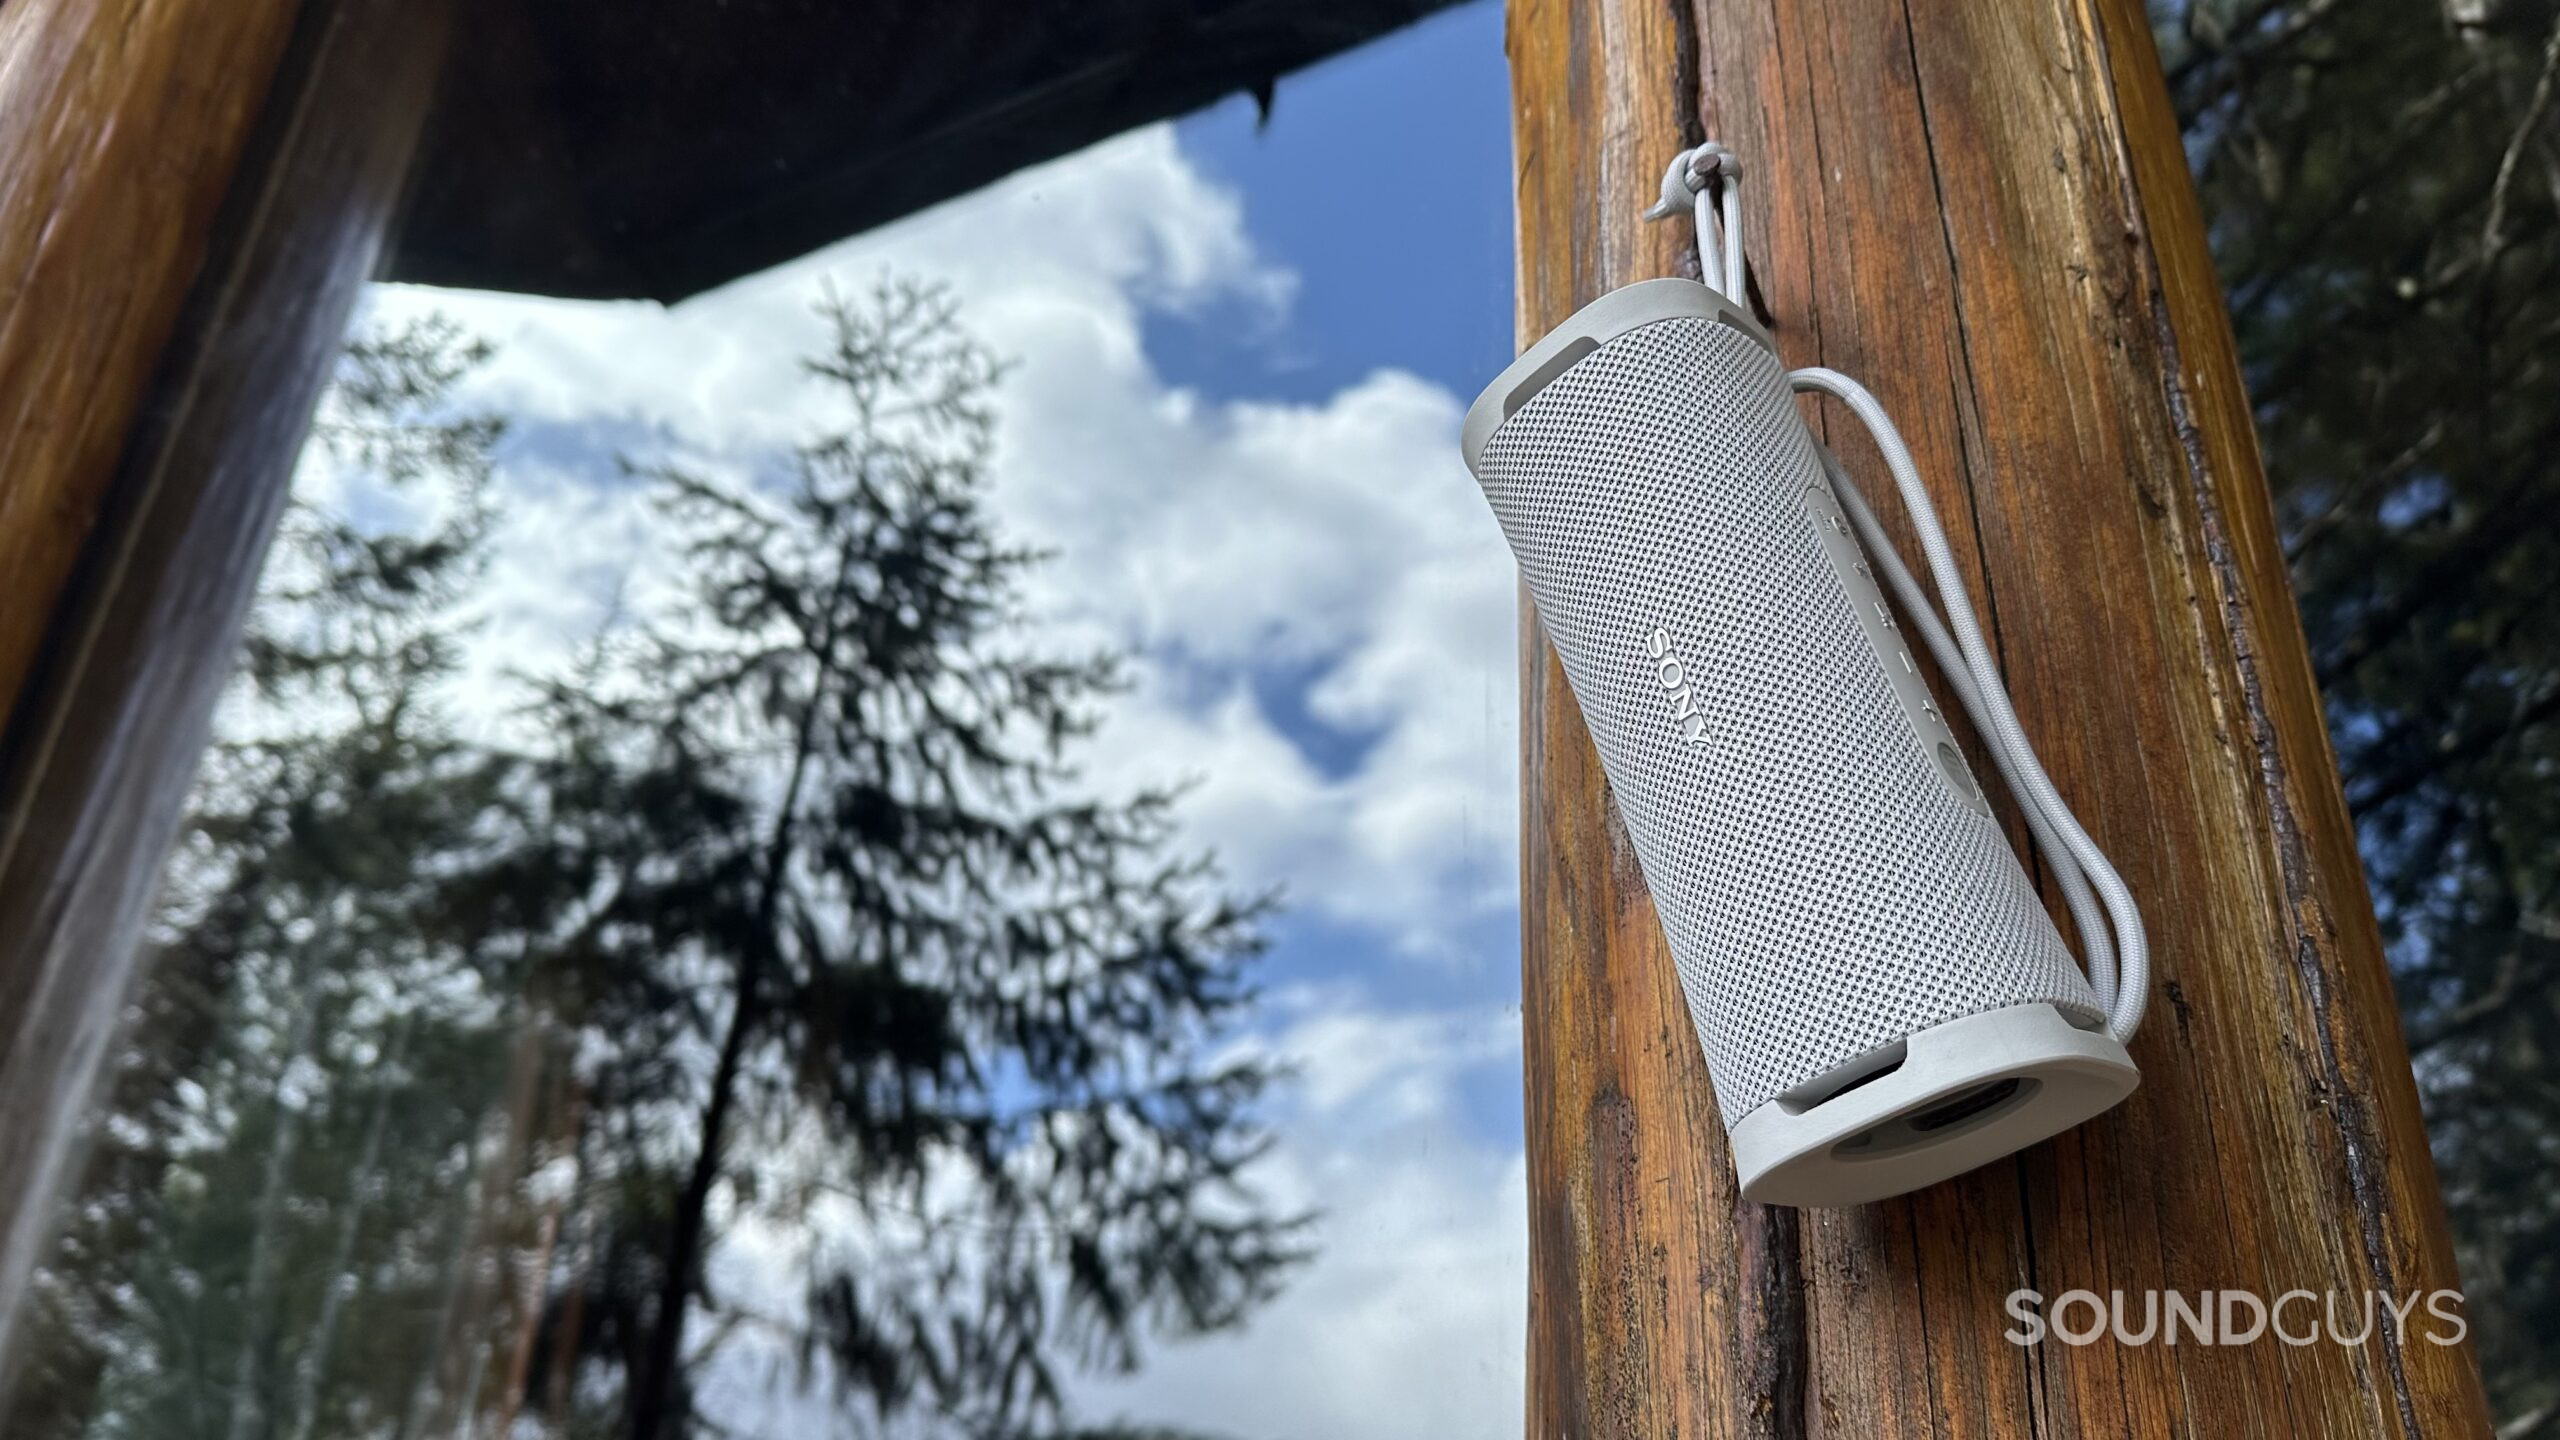 The Sony ULT Field 1 speaker hanging from a nail on the outside of a cabin.